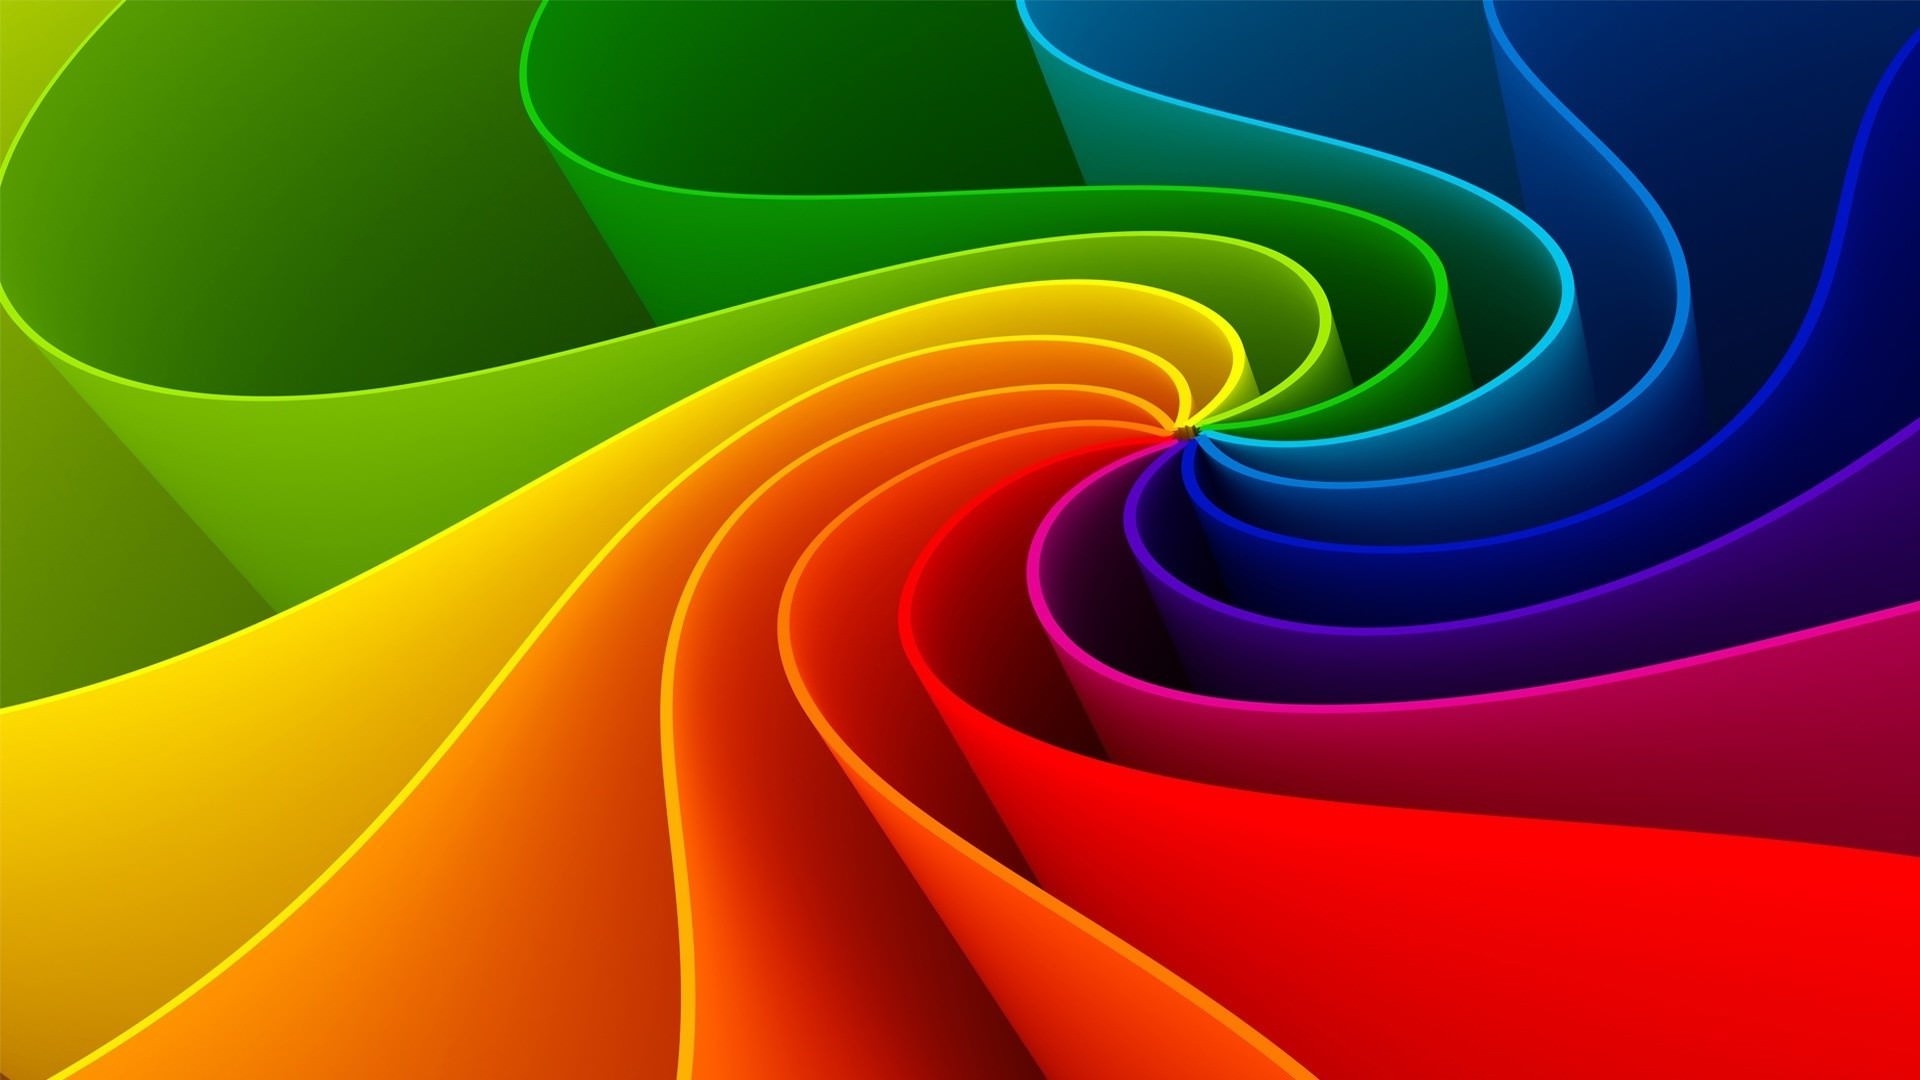 FREE HD Rainbow Background Image and Wallpaper in PSD